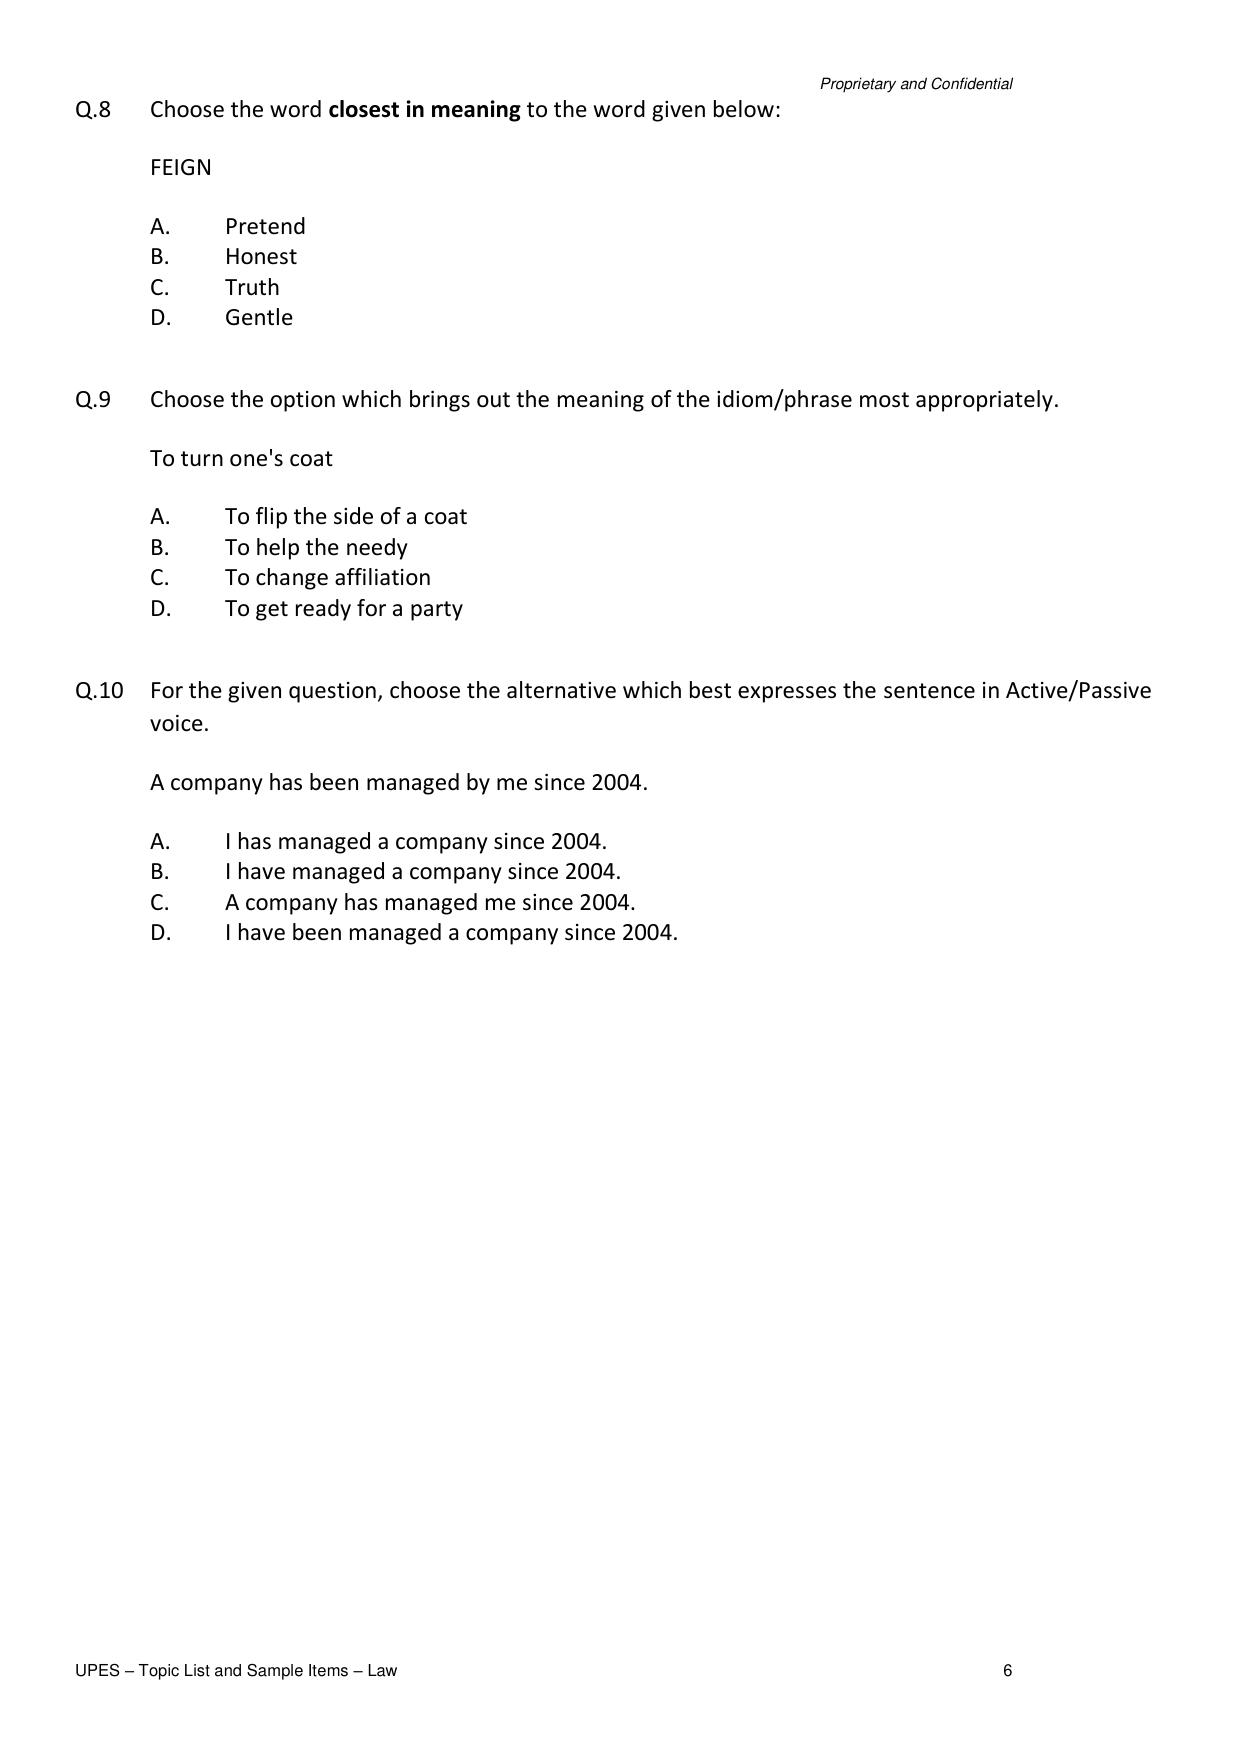 UPES Law Sample Papers - Page 6